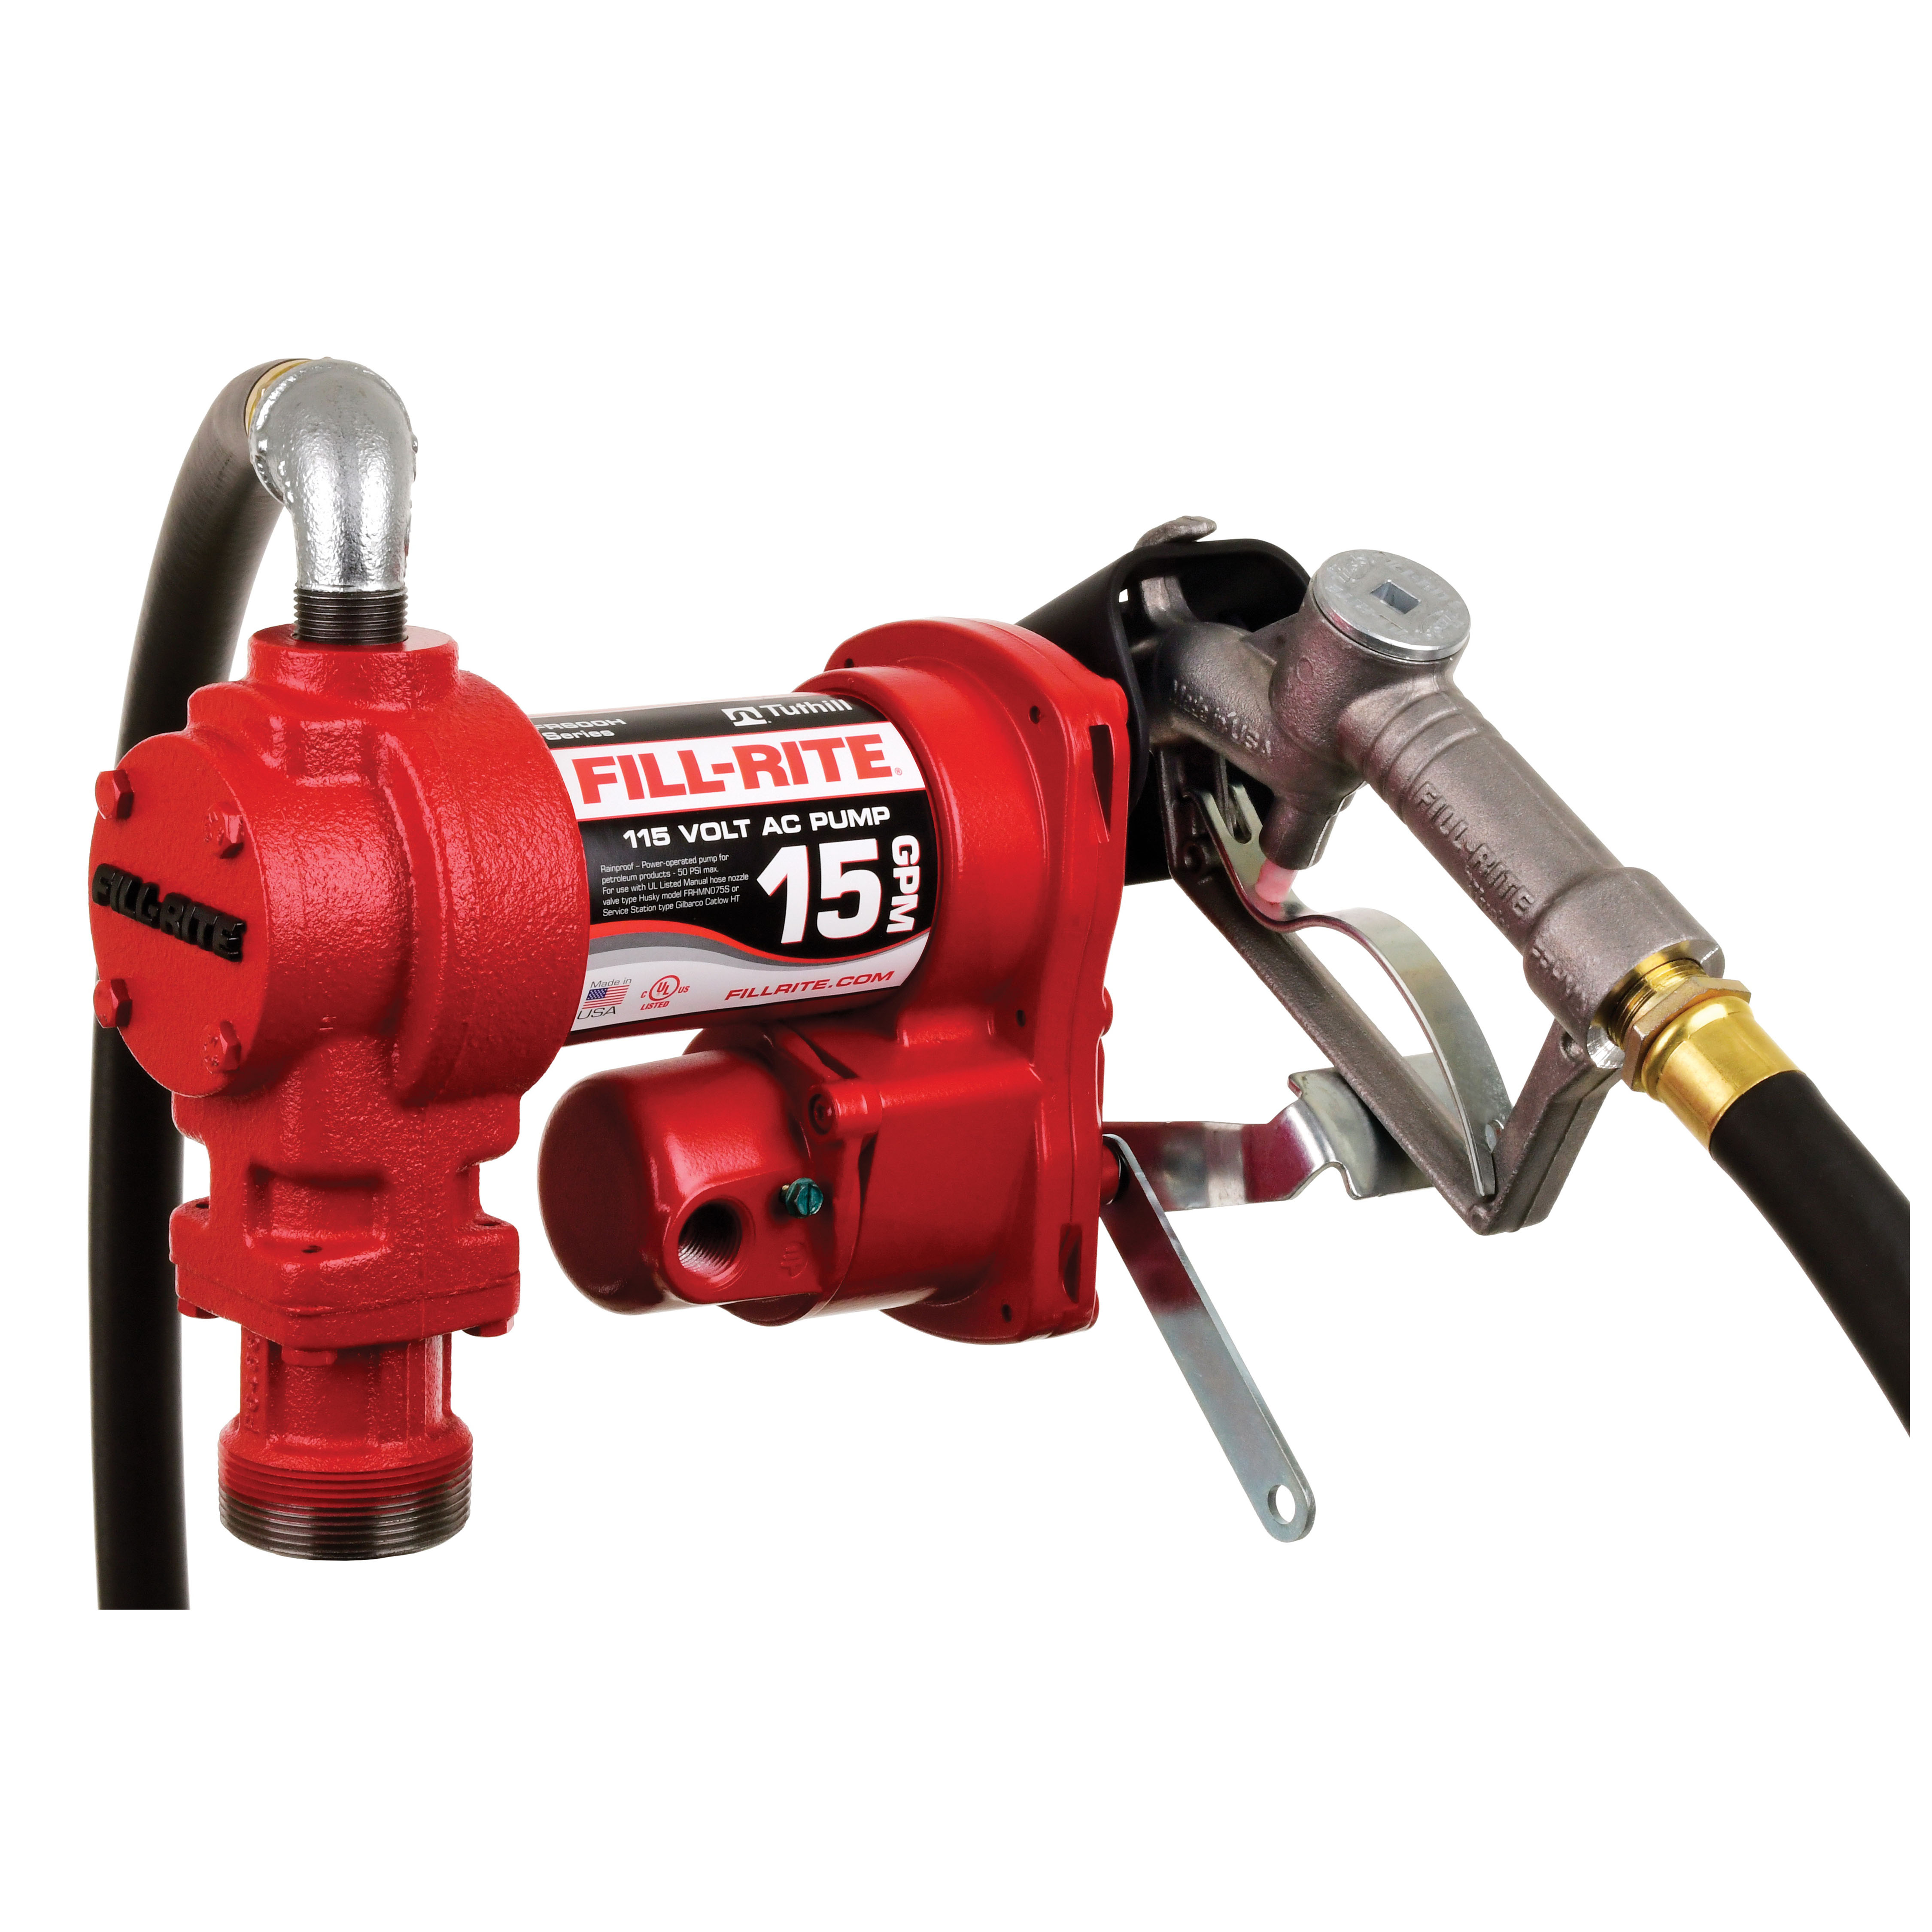 FR600 FR610H AC Pump with Hose, Motor: 1/6 hp, 34 in L Suction Tube, 3/4 in Outlet, 15 gpm, Iron